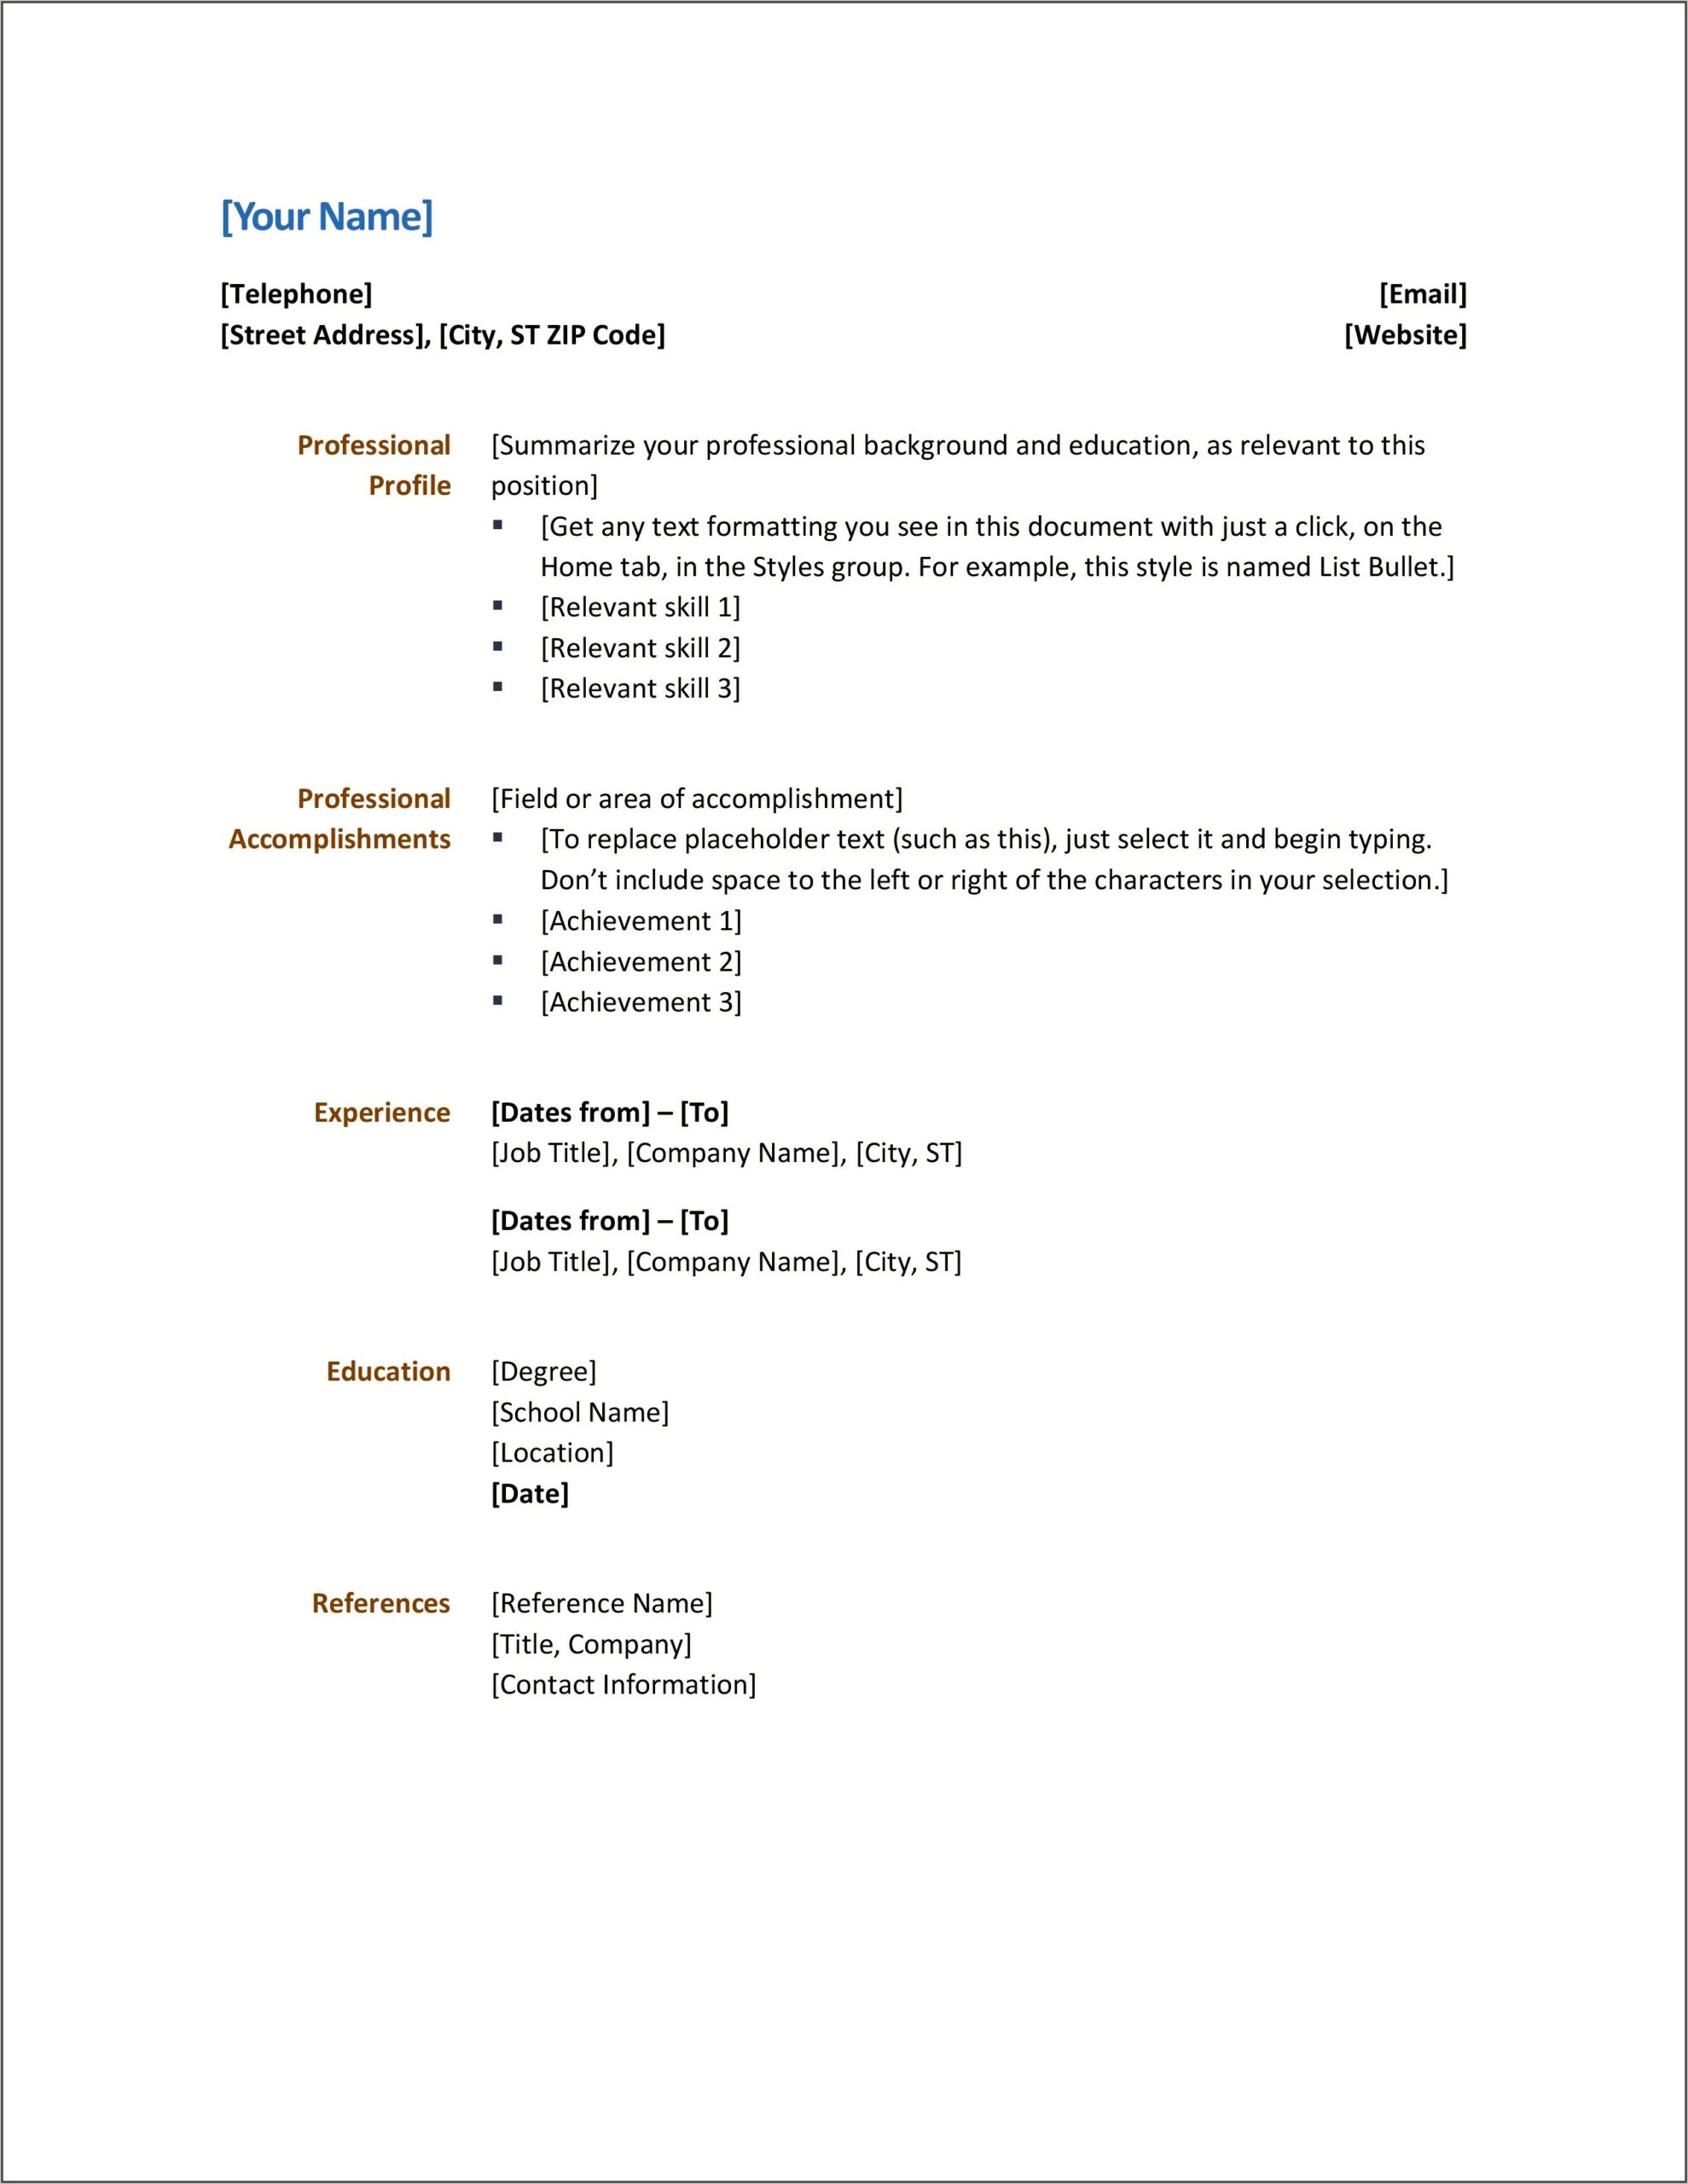 Basic Examples Of Resume Formats